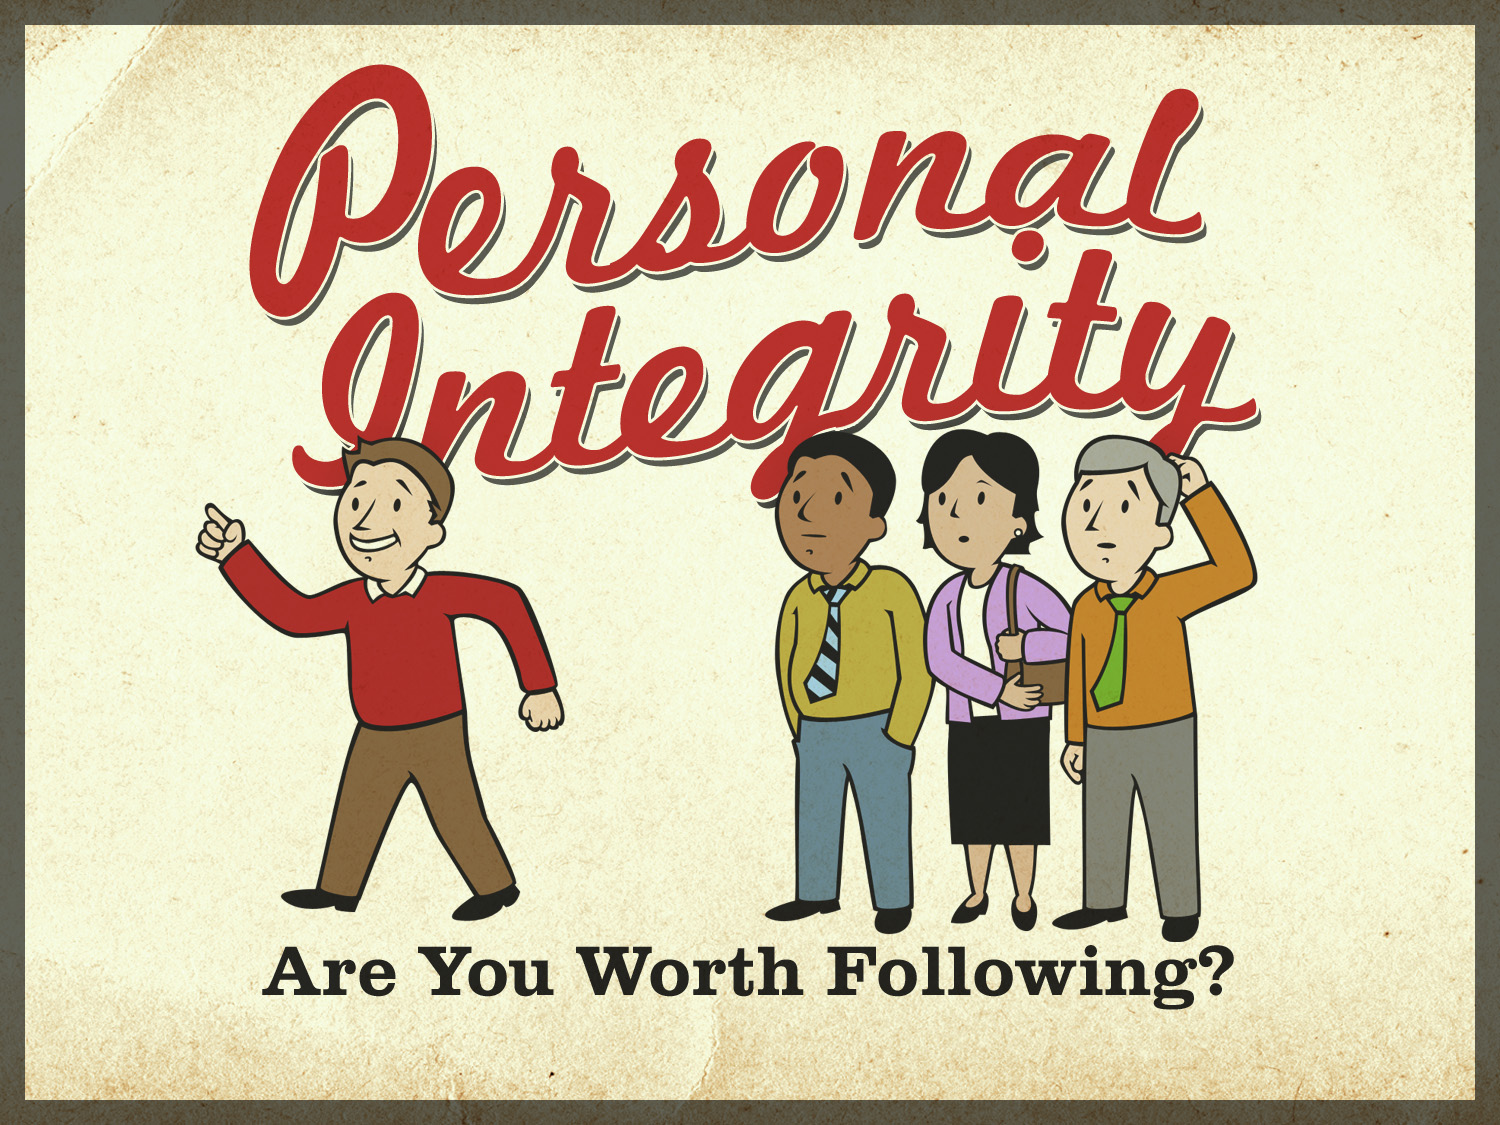 personal integrity